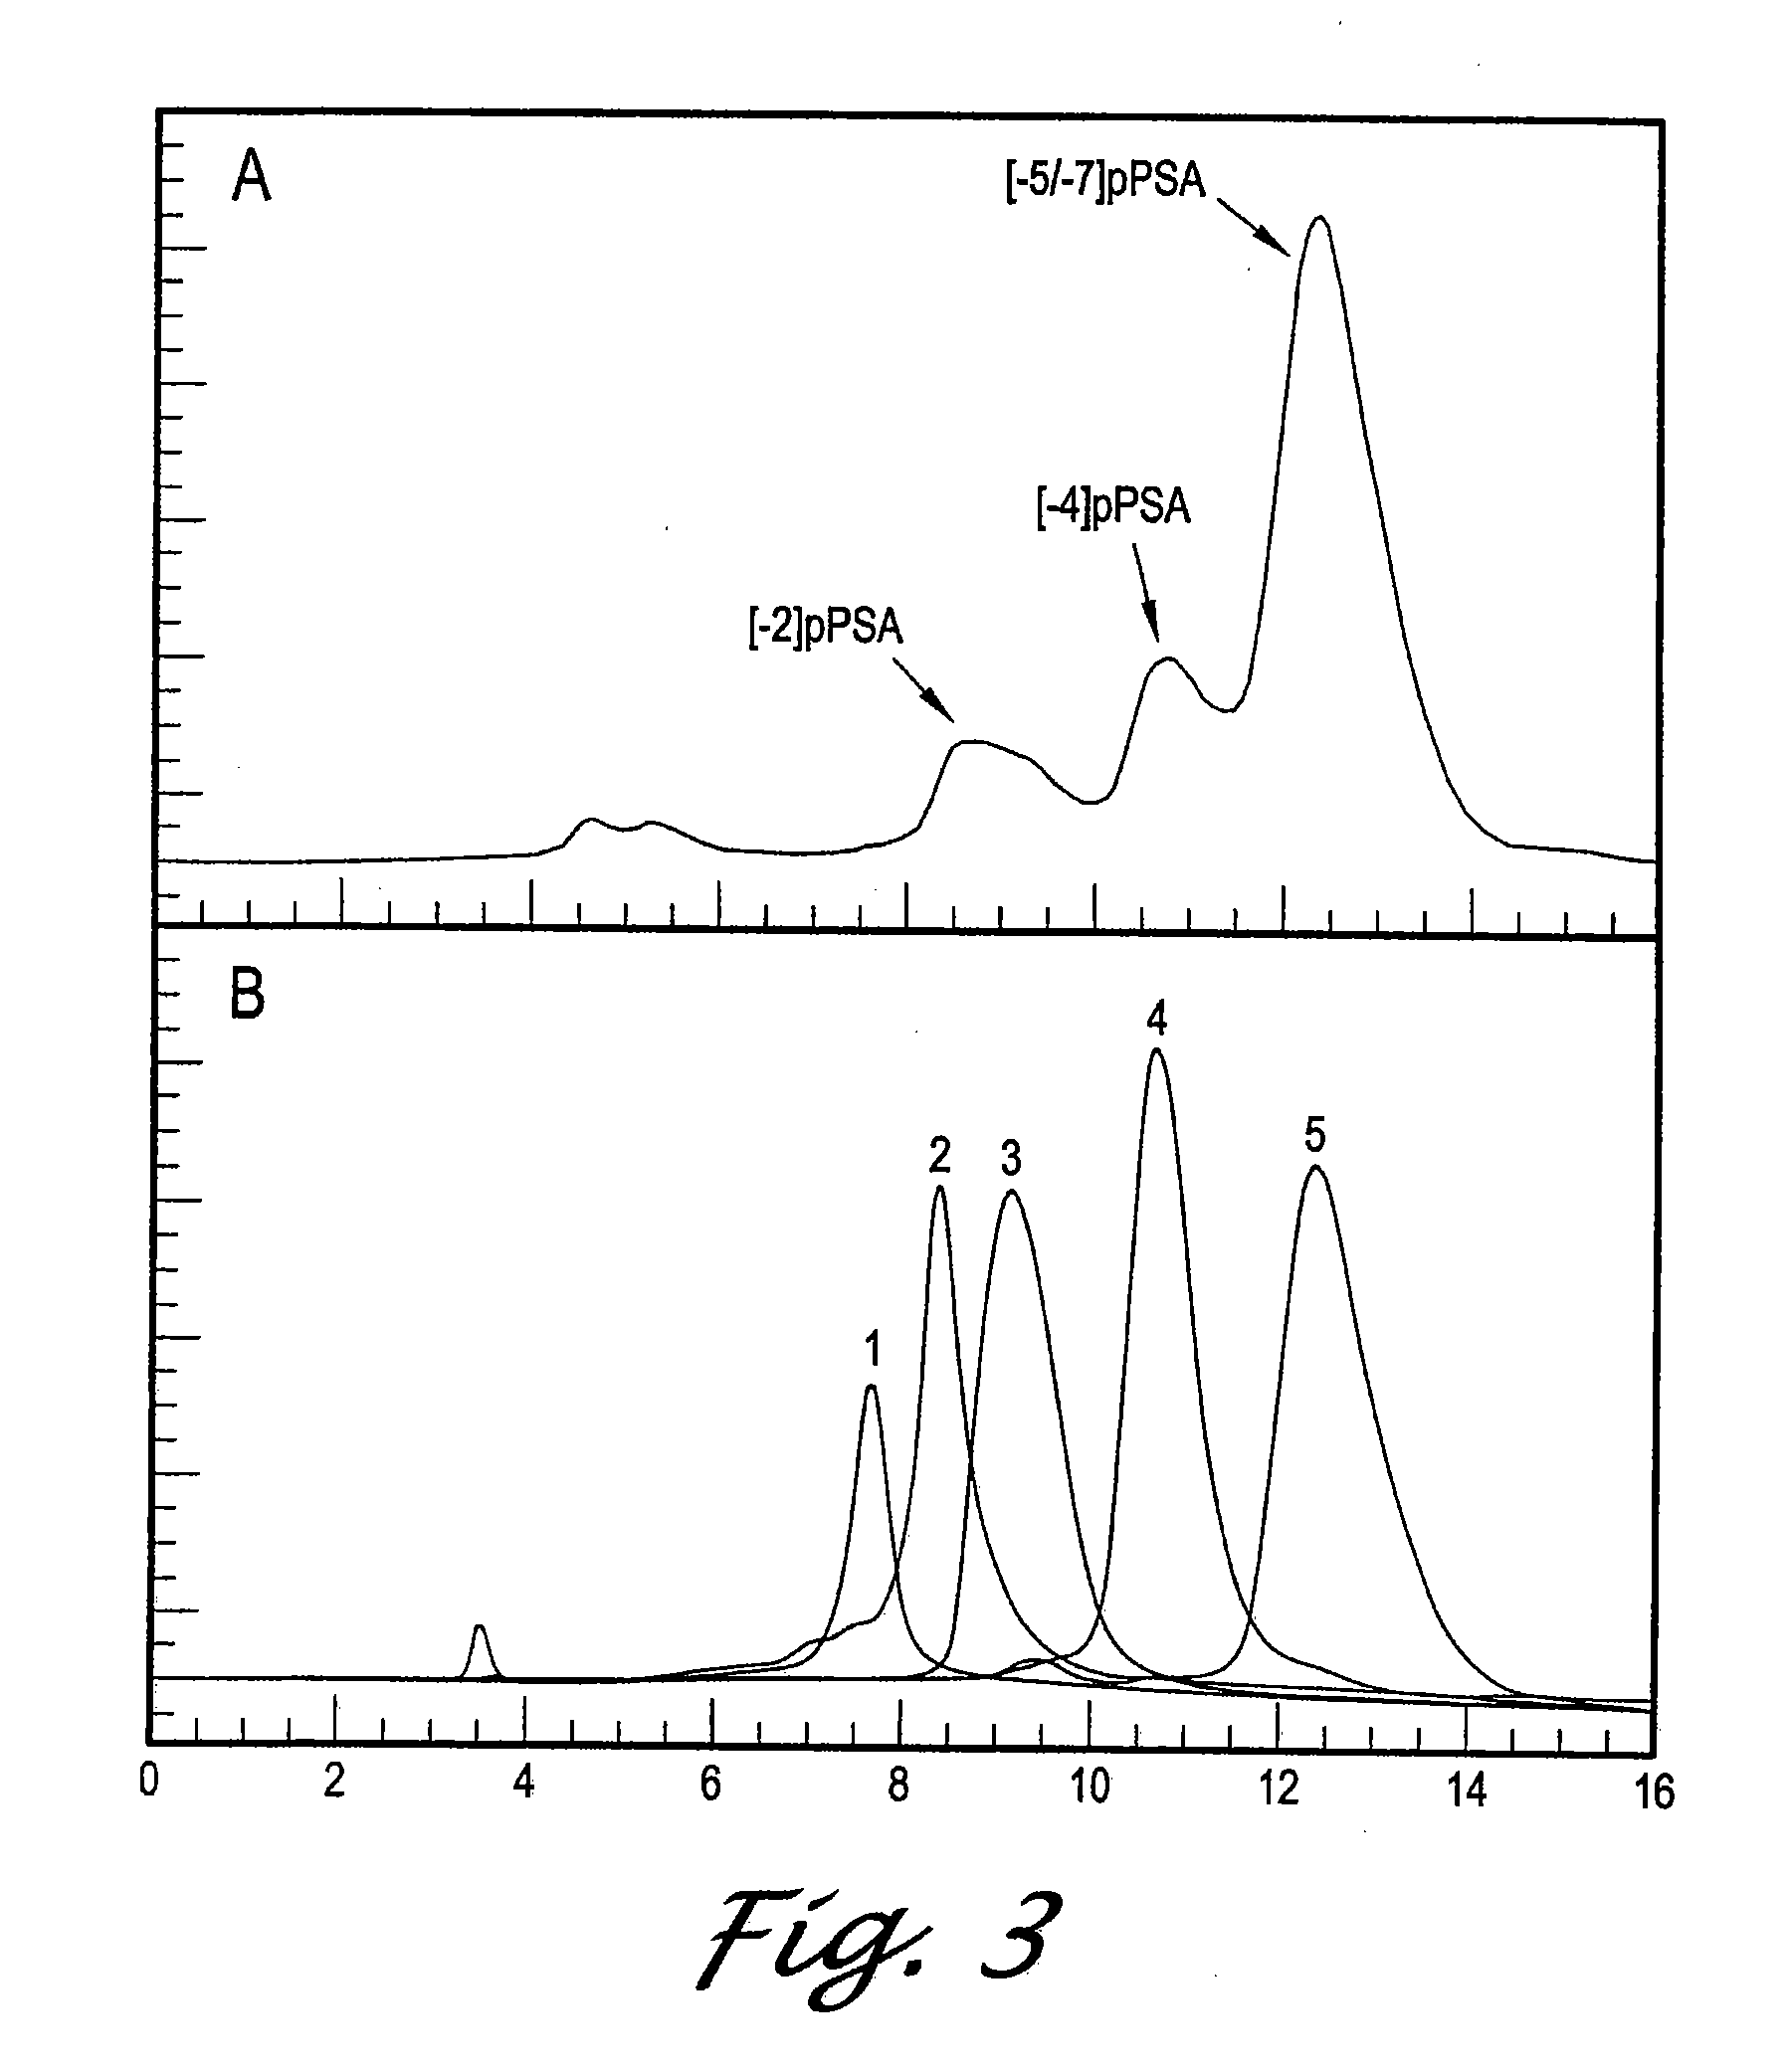 Forms of Prostate Specific Antigens and Methods for their Detection